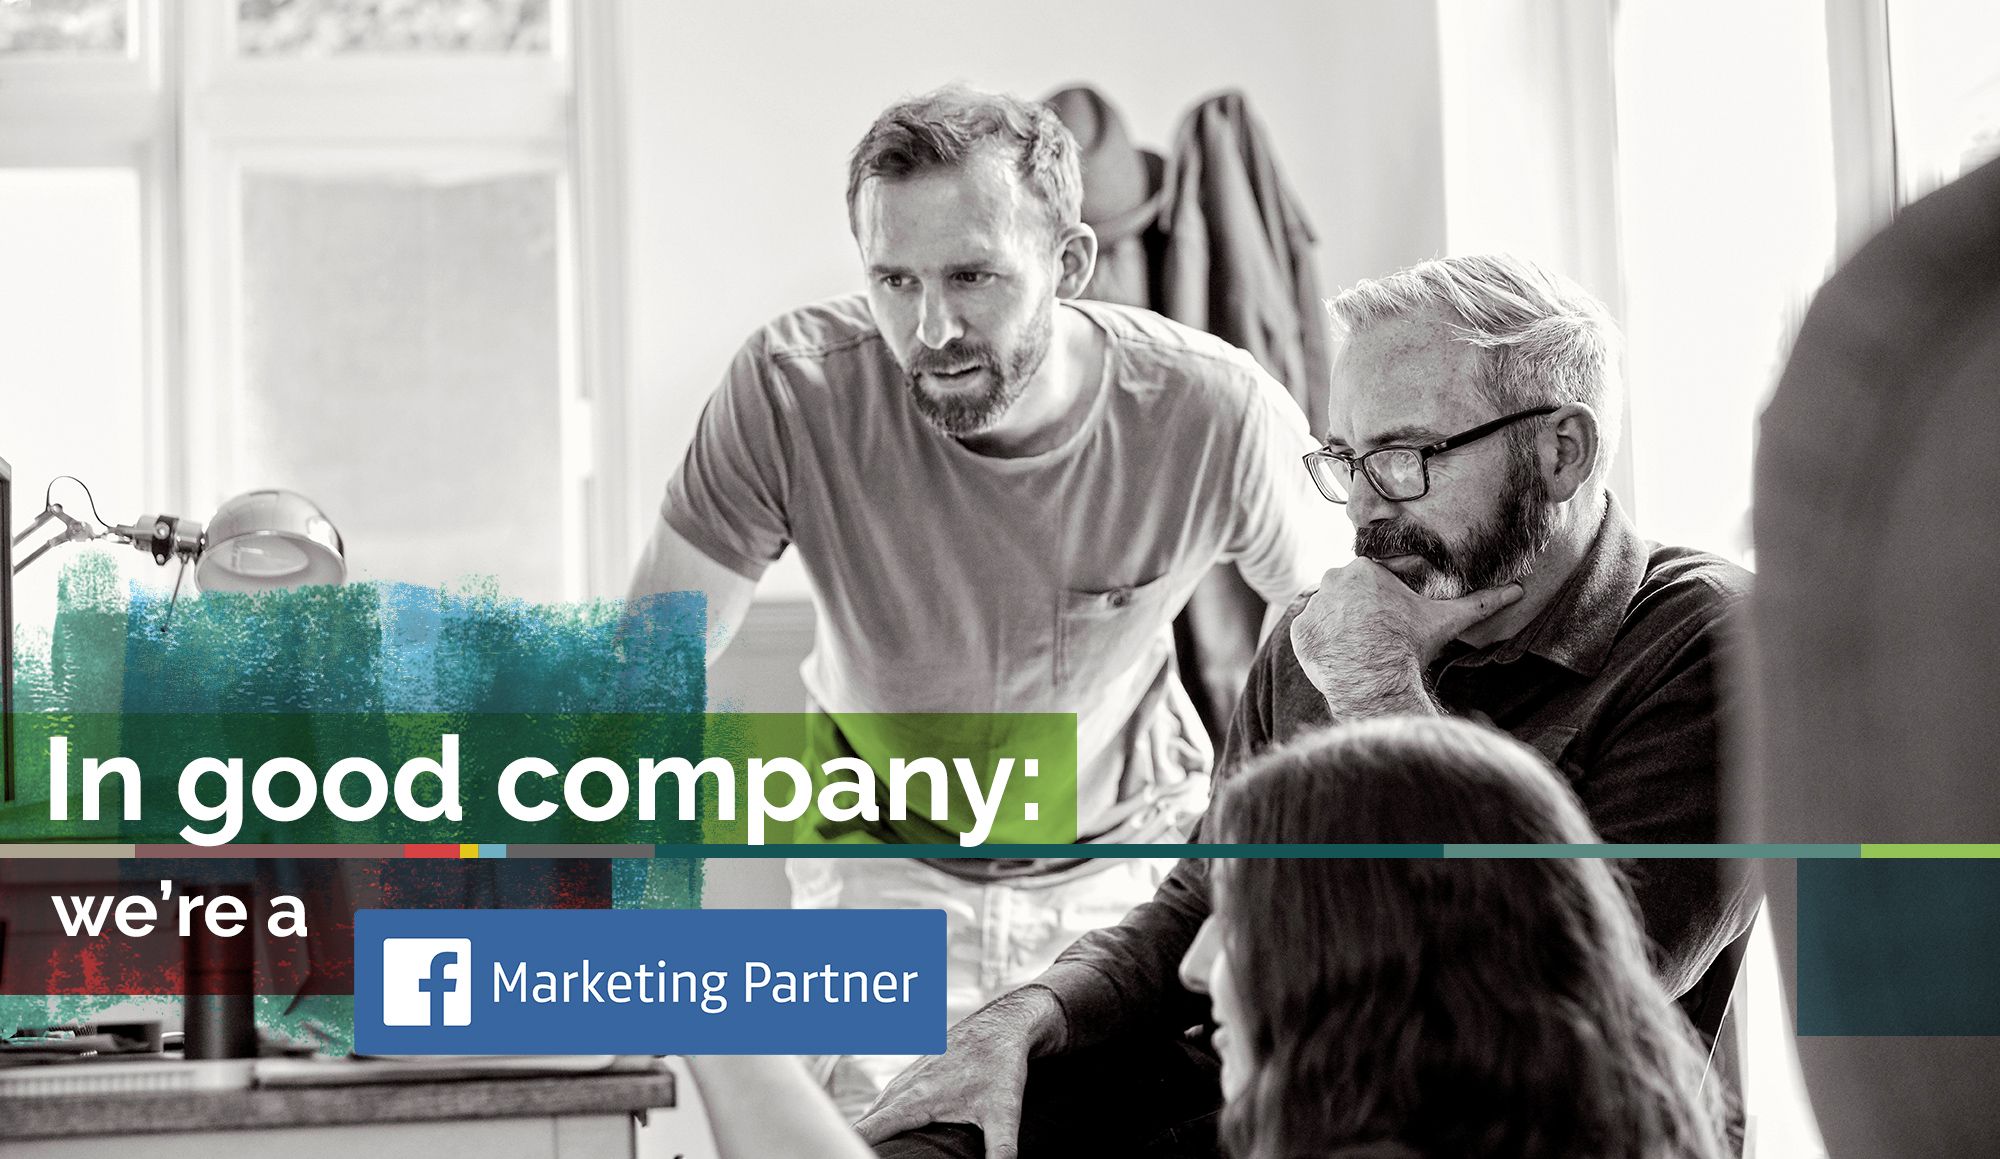 In good company: we're a Facebook Marketing Partner